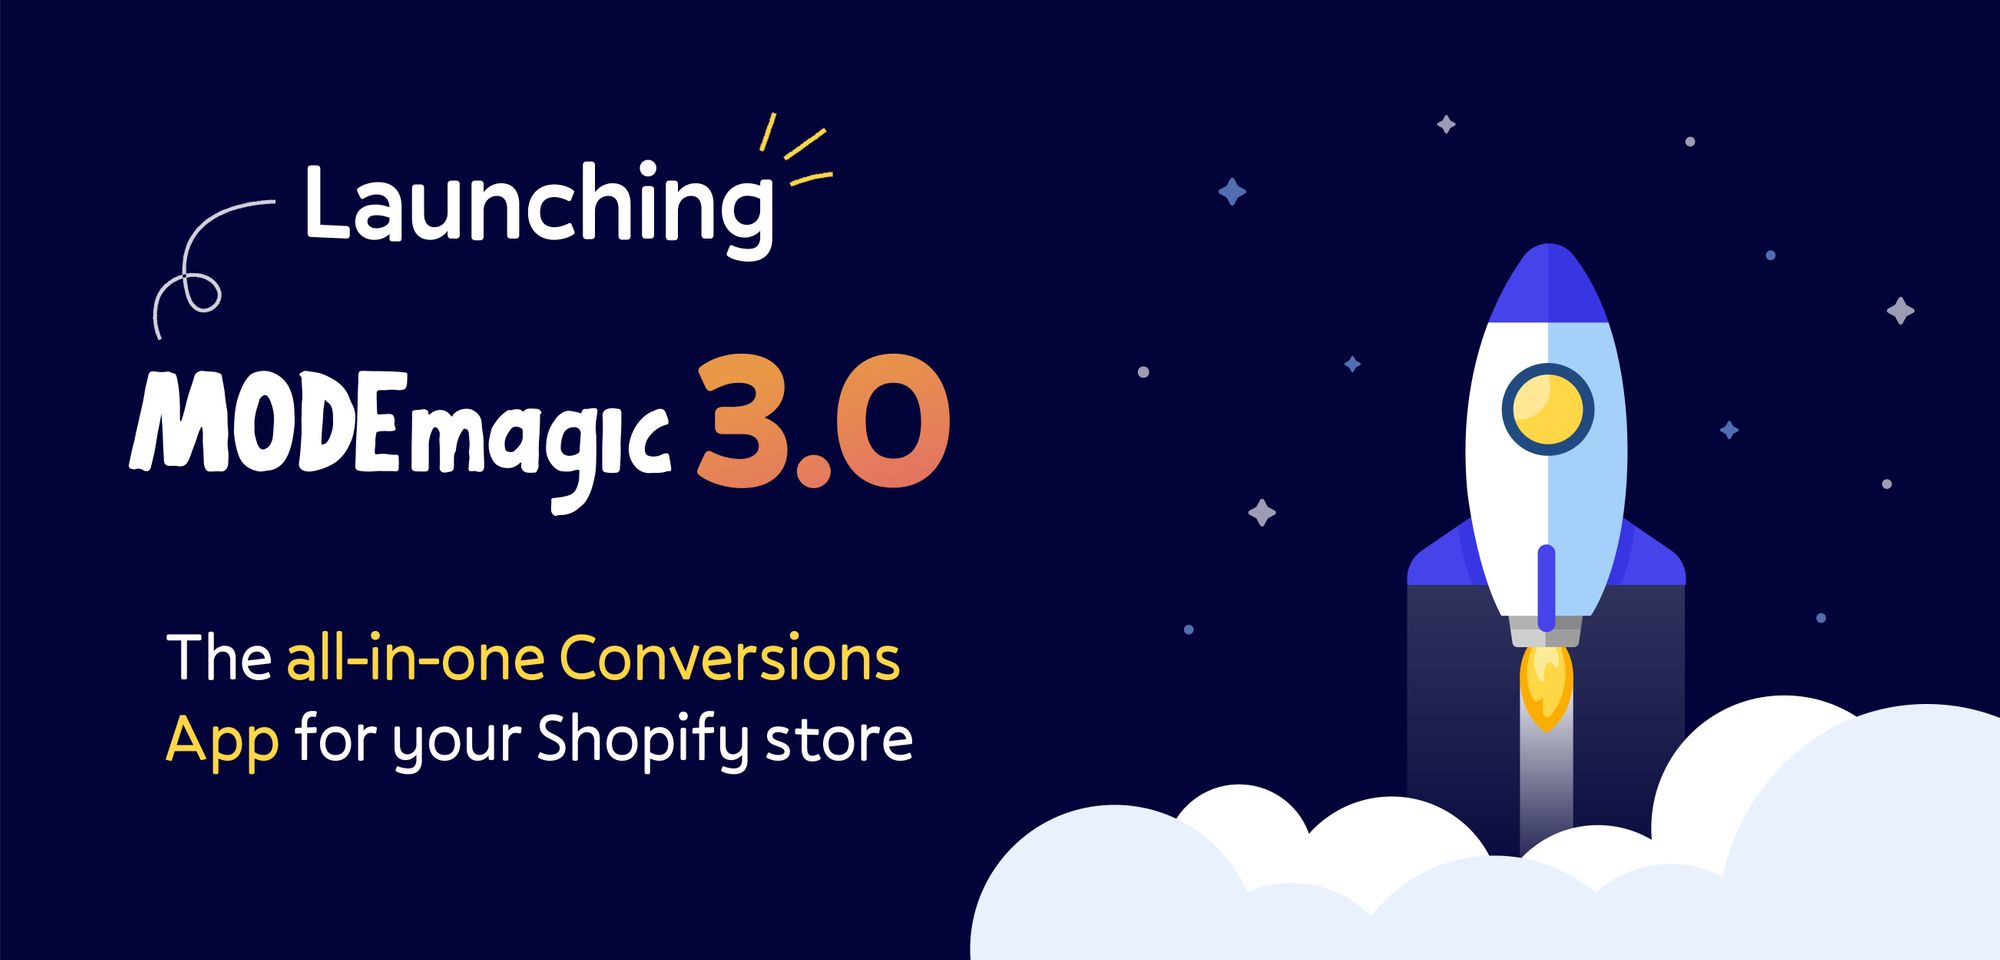 🚀 Meet ModeMagic 3.0: the Conversion OS for Your Shopify Store